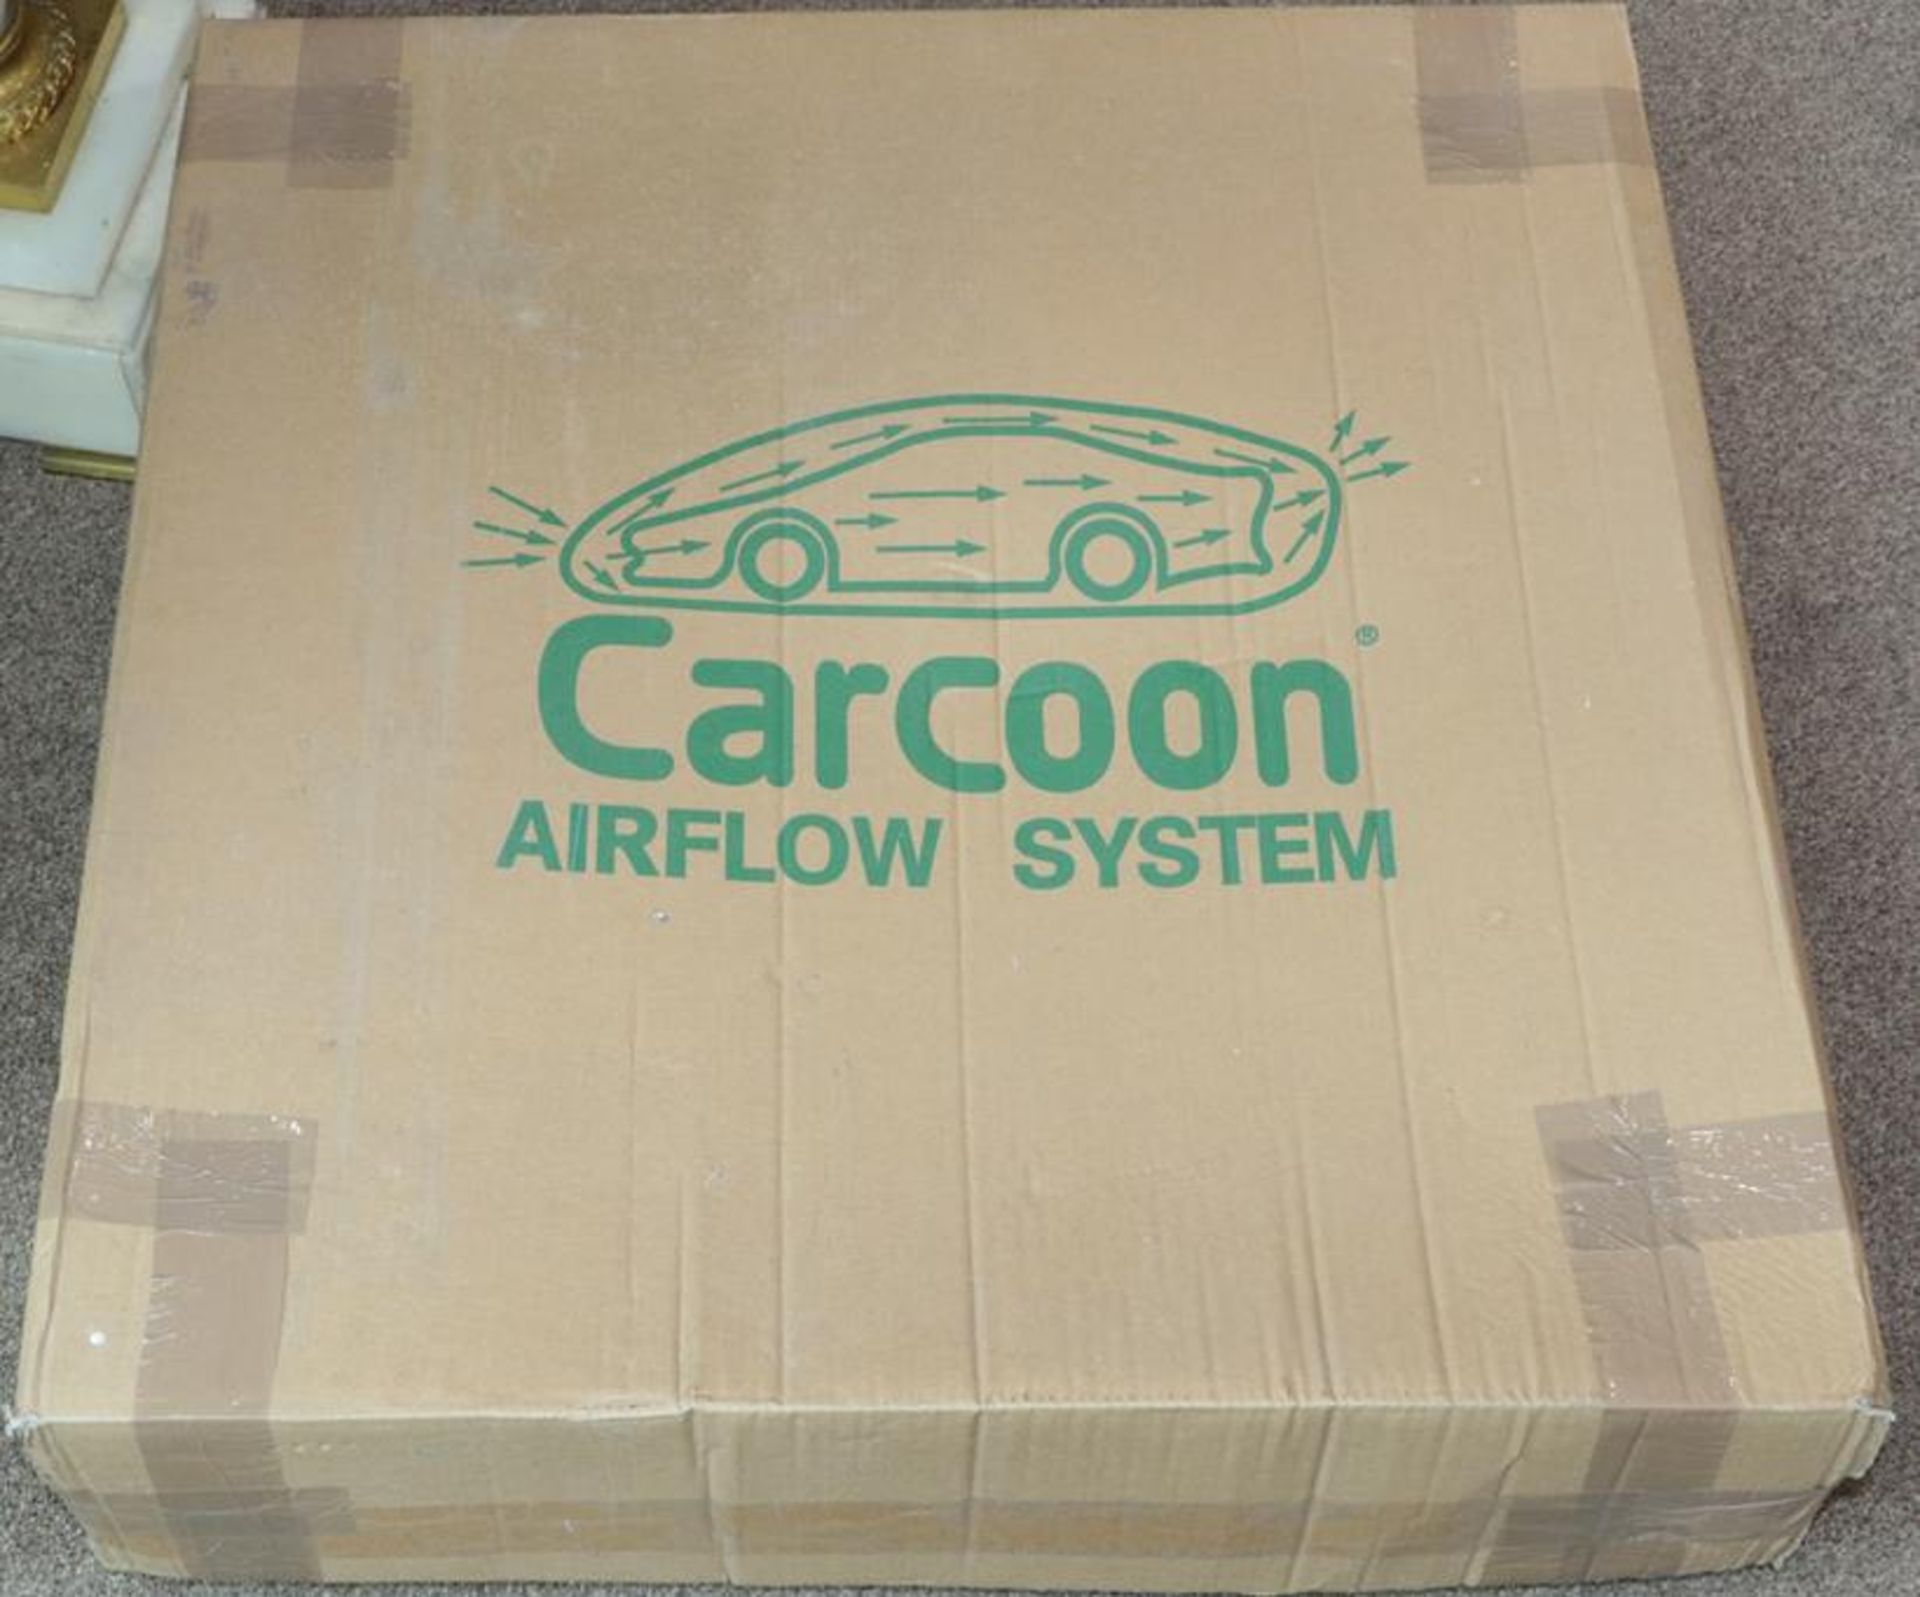 Carcoon: A Size 3 Red 160 Car Cover, in new condition with original box, part no.040727. Unsure of